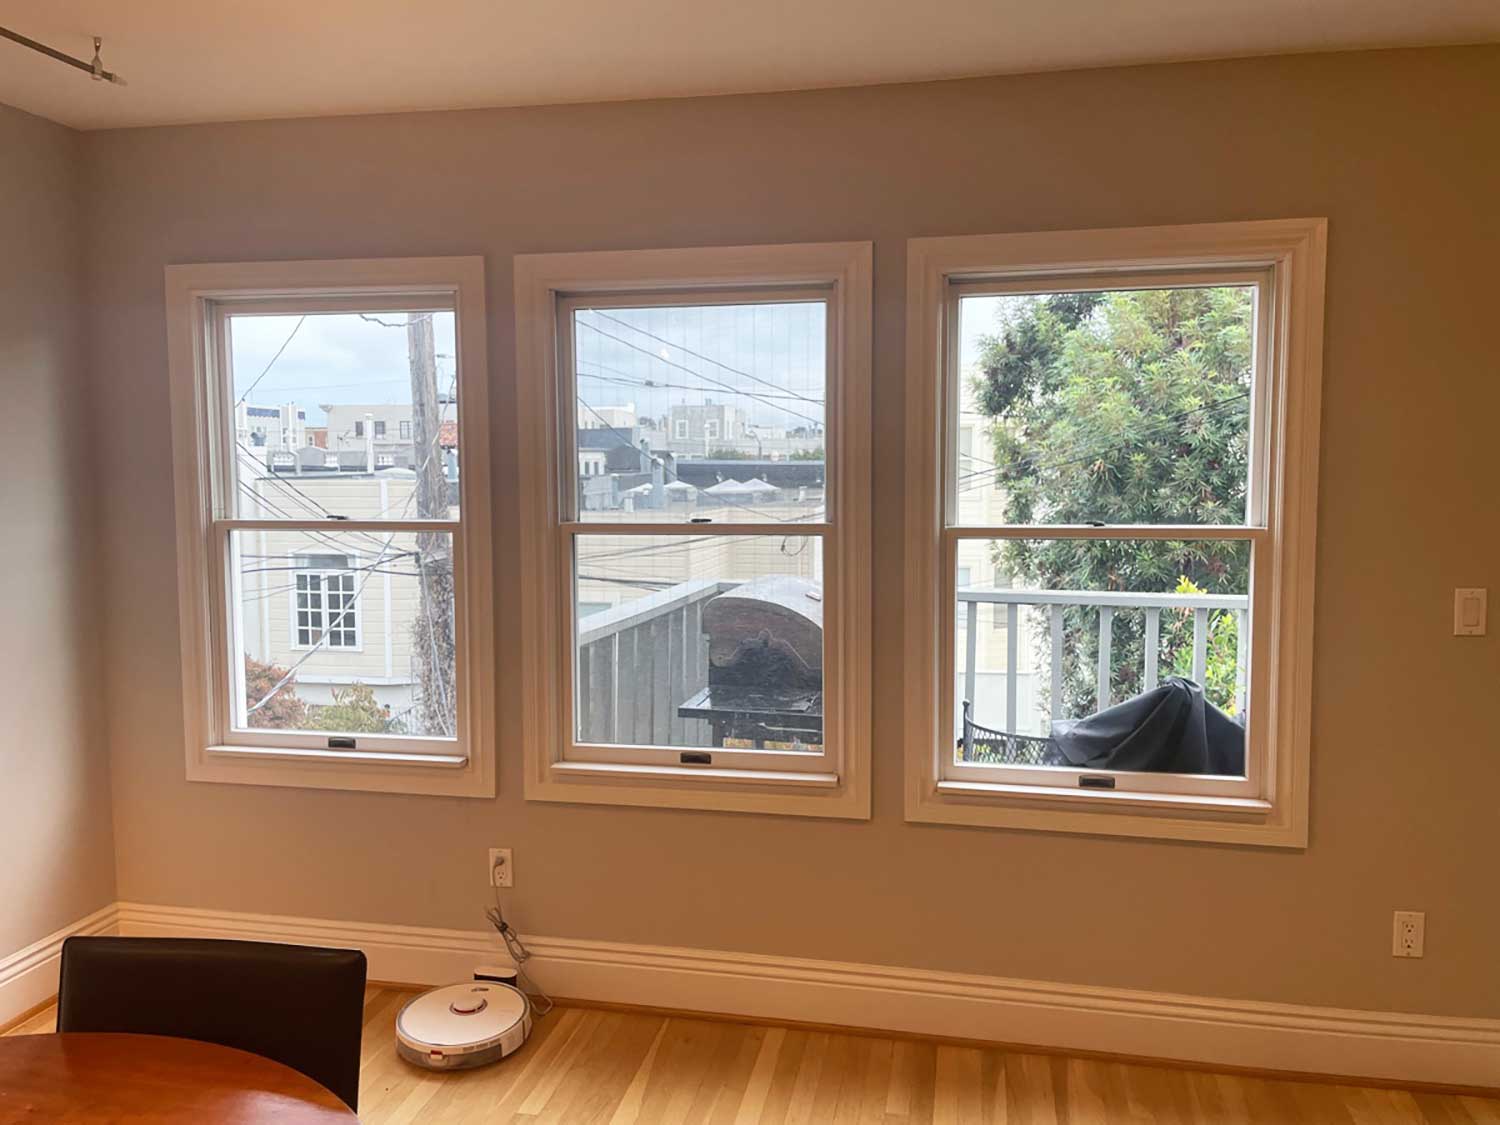 ClimatePro installed 3M Window Film on the windows and doors of this San Francisco home.